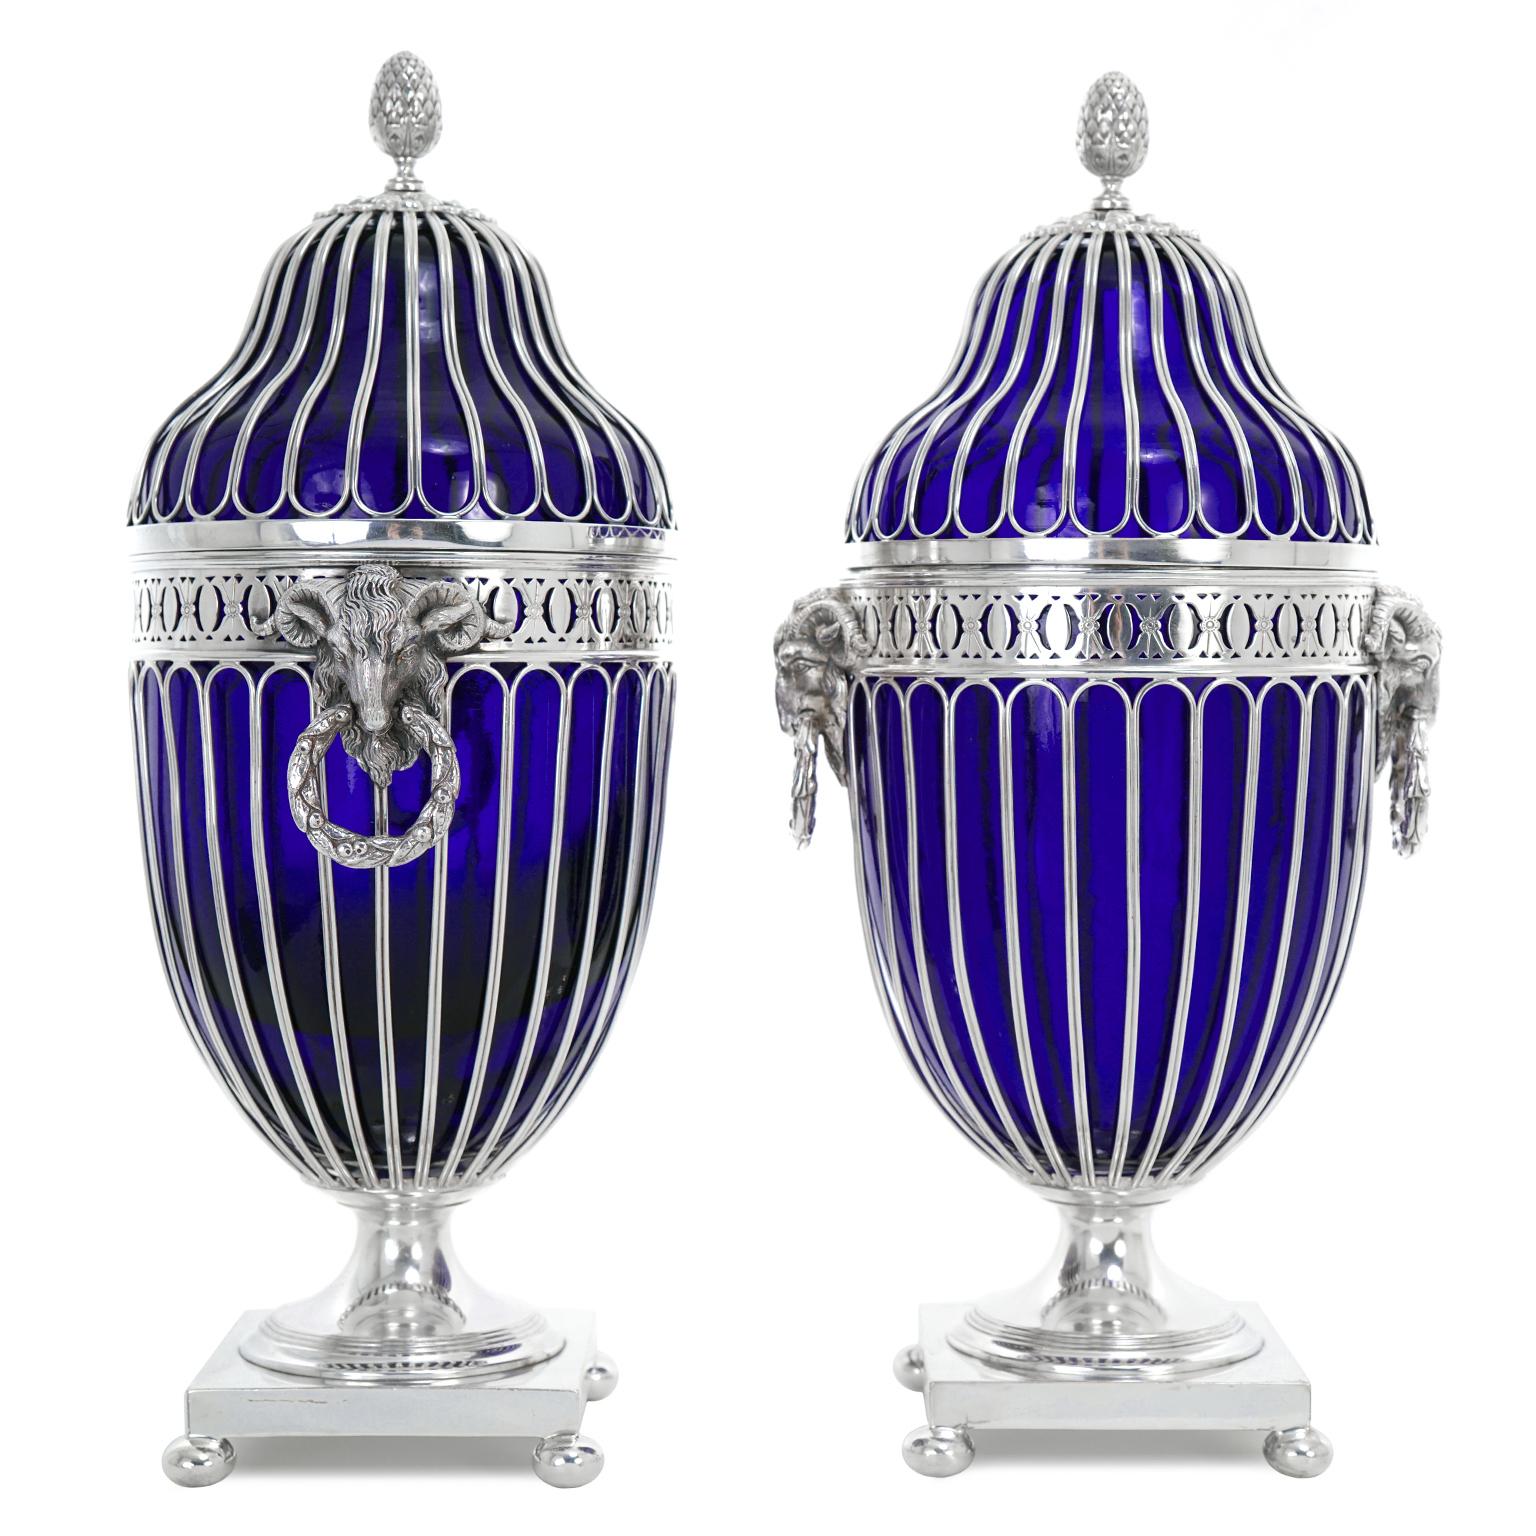 Silver Plate Pair of English Silver-Plate Chestnut Urns, C 1920s For Sale